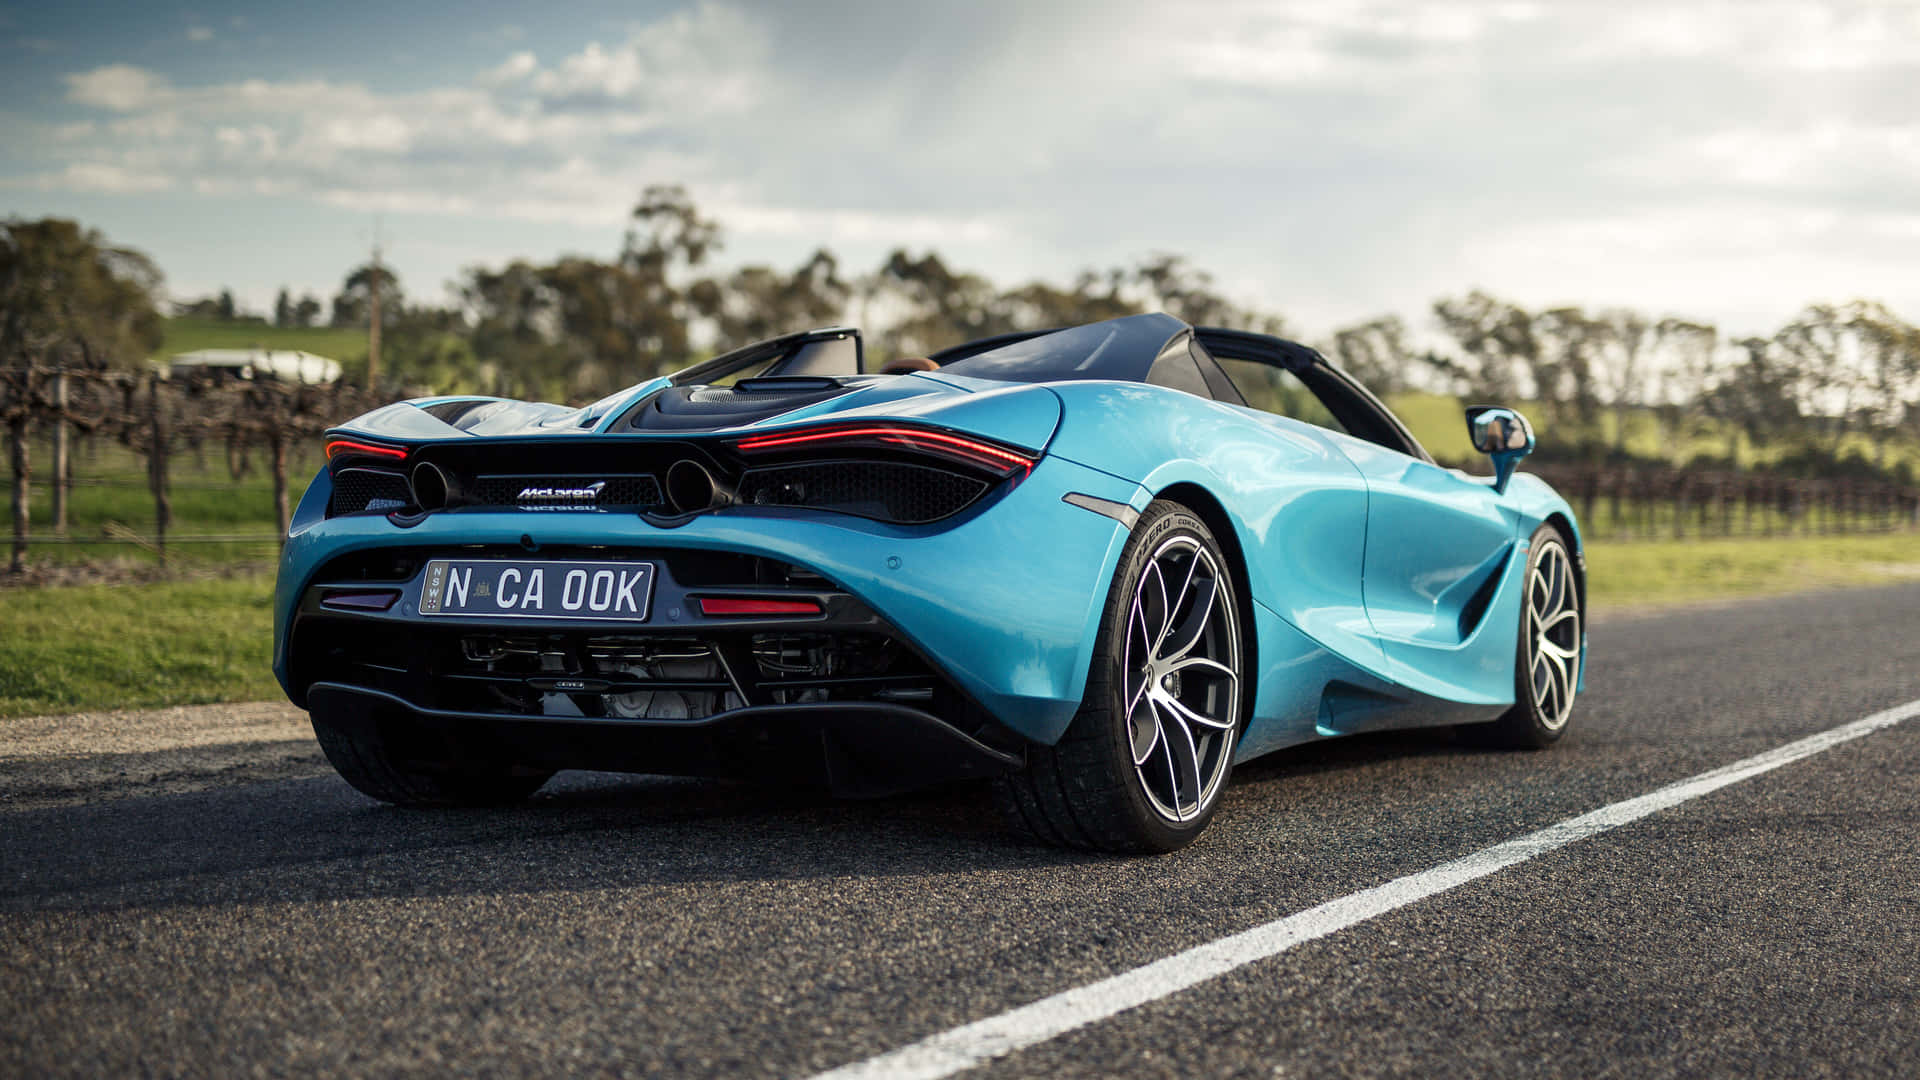 "Discover the Power of Performance with the McLaren 720s"